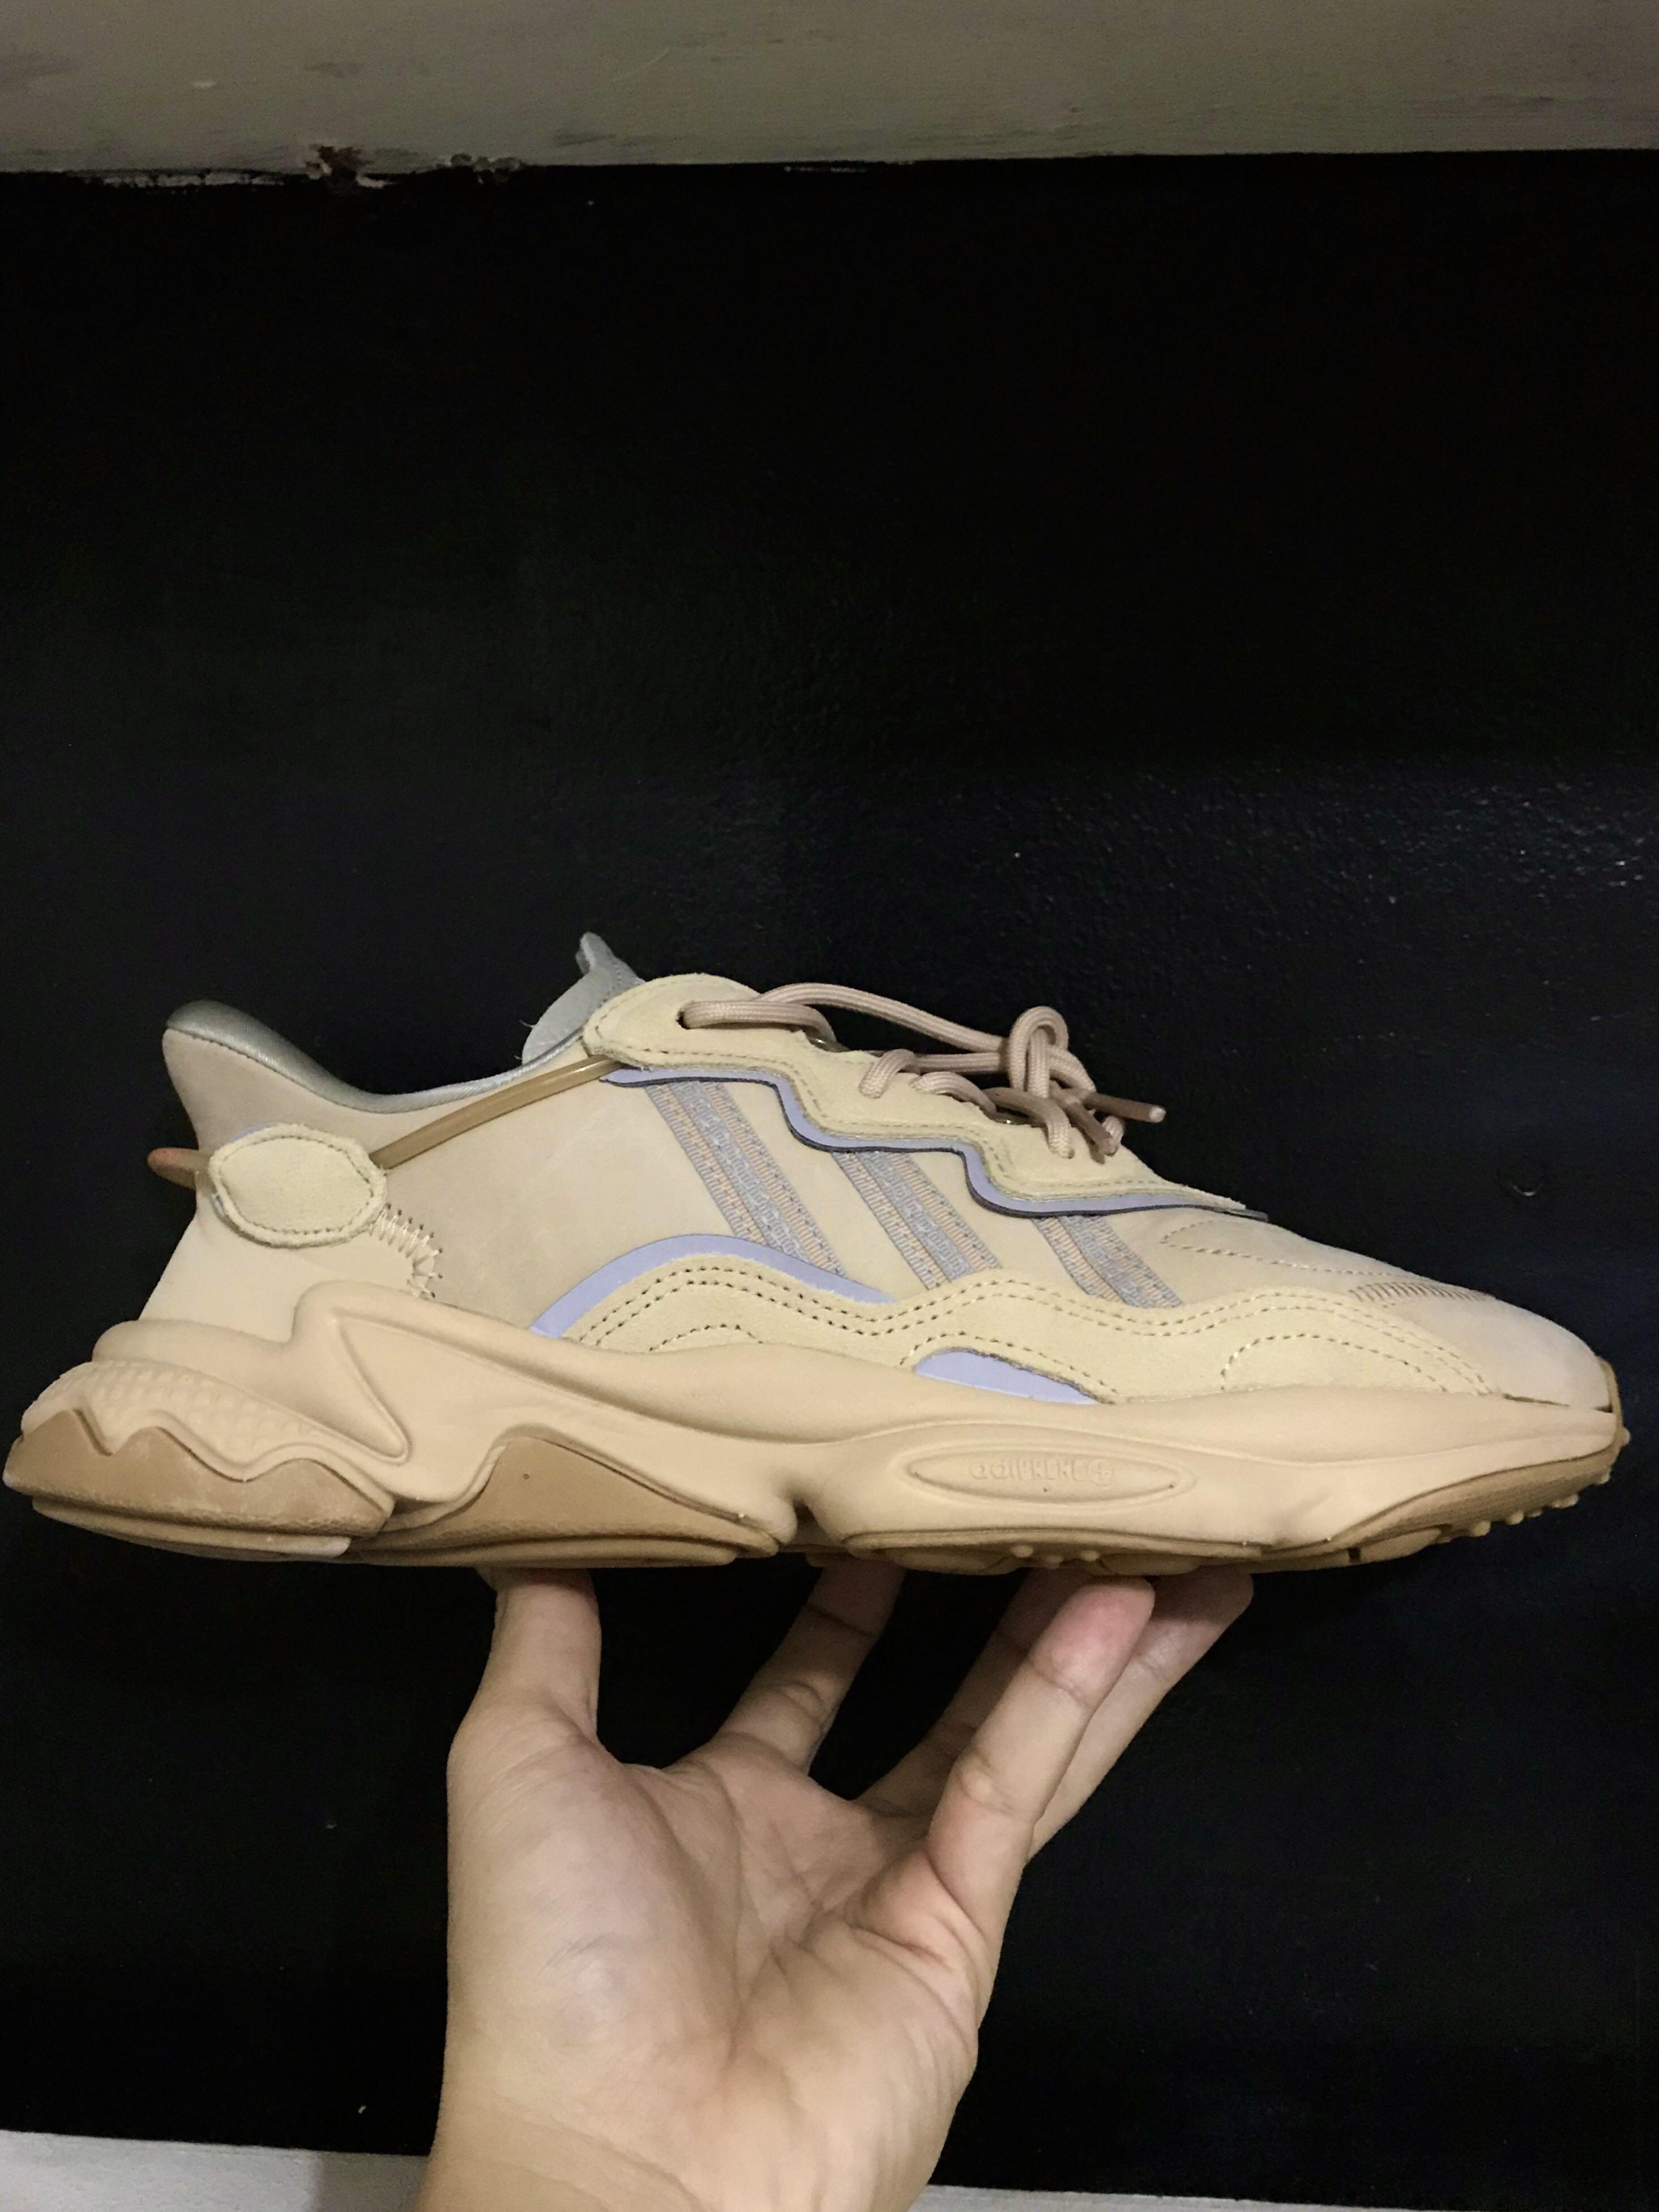 Adidas Ozweego Suede (Pale nude) limited edition US 9.5, Men's Fashion,  Footwear, Sneakers on Carousell